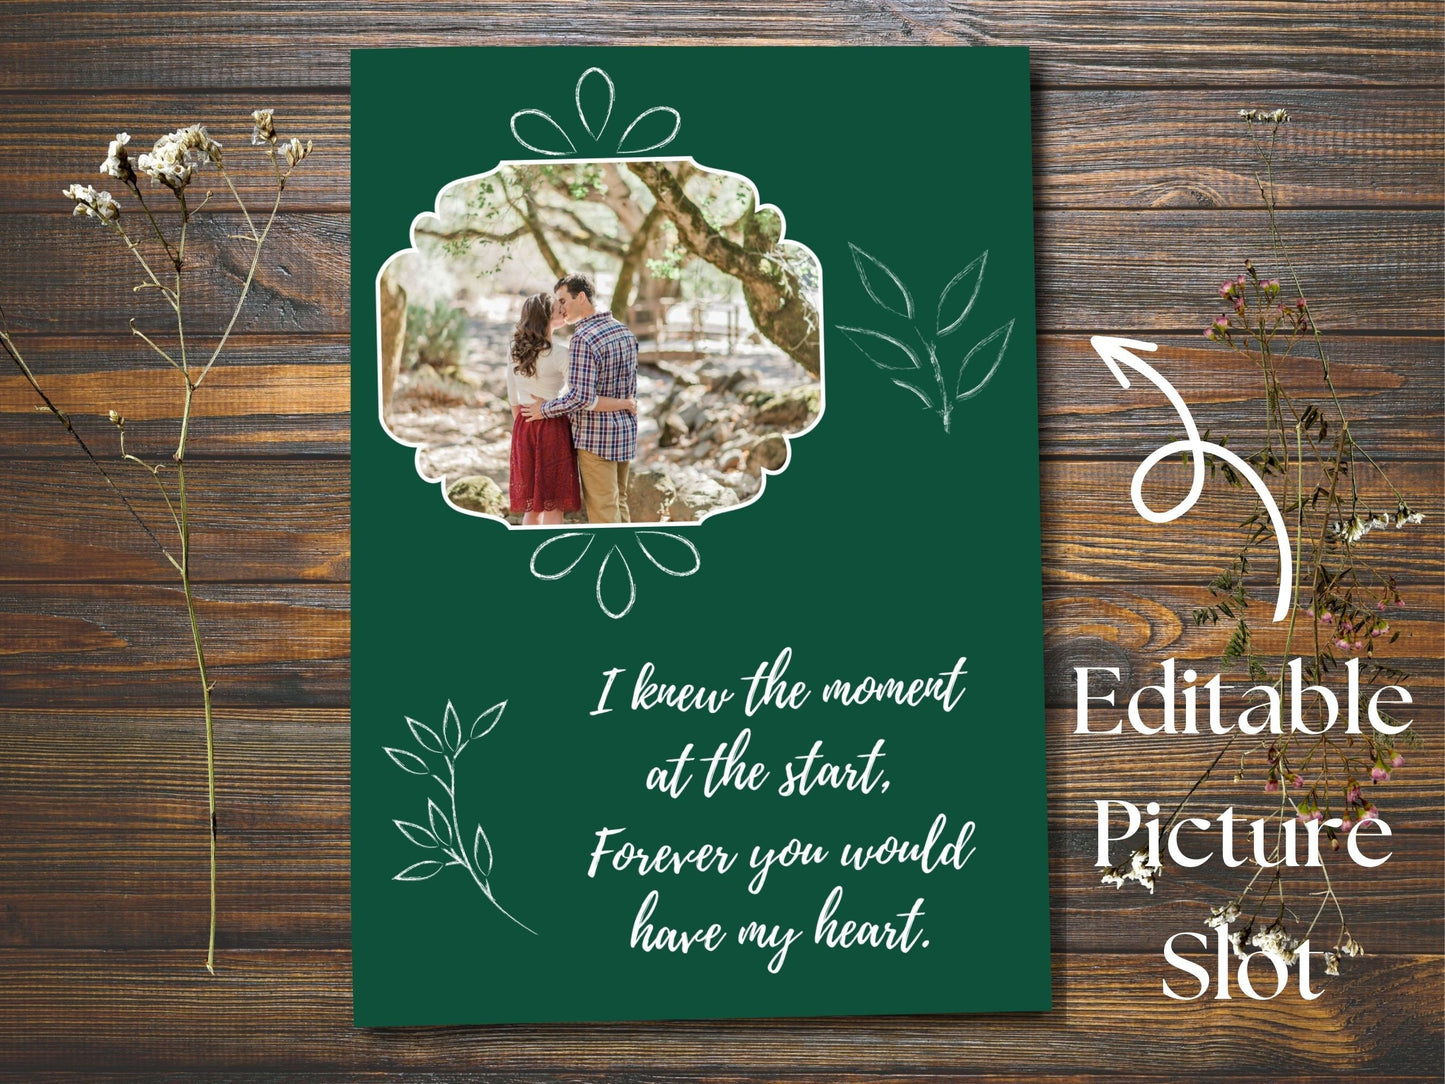 Customizable Wedding Invitation for Fall Themed Wedding | Jewel Tone Emerald with White Inscription and Photo Slot